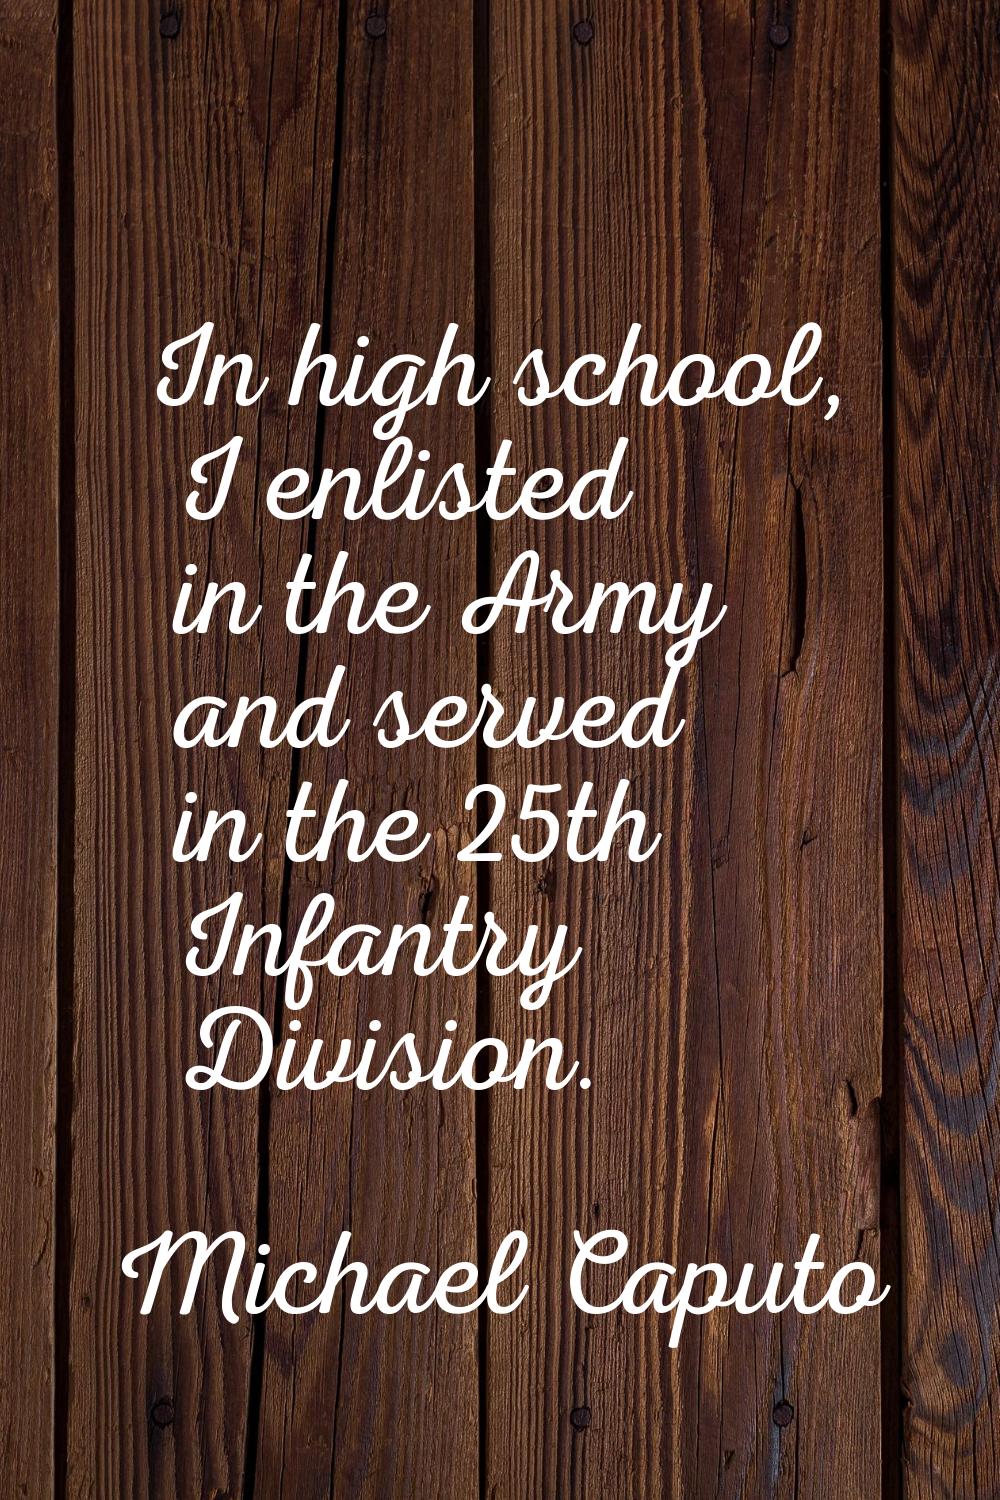 In high school, I enlisted in the Army and served in the 25th Infantry Division.